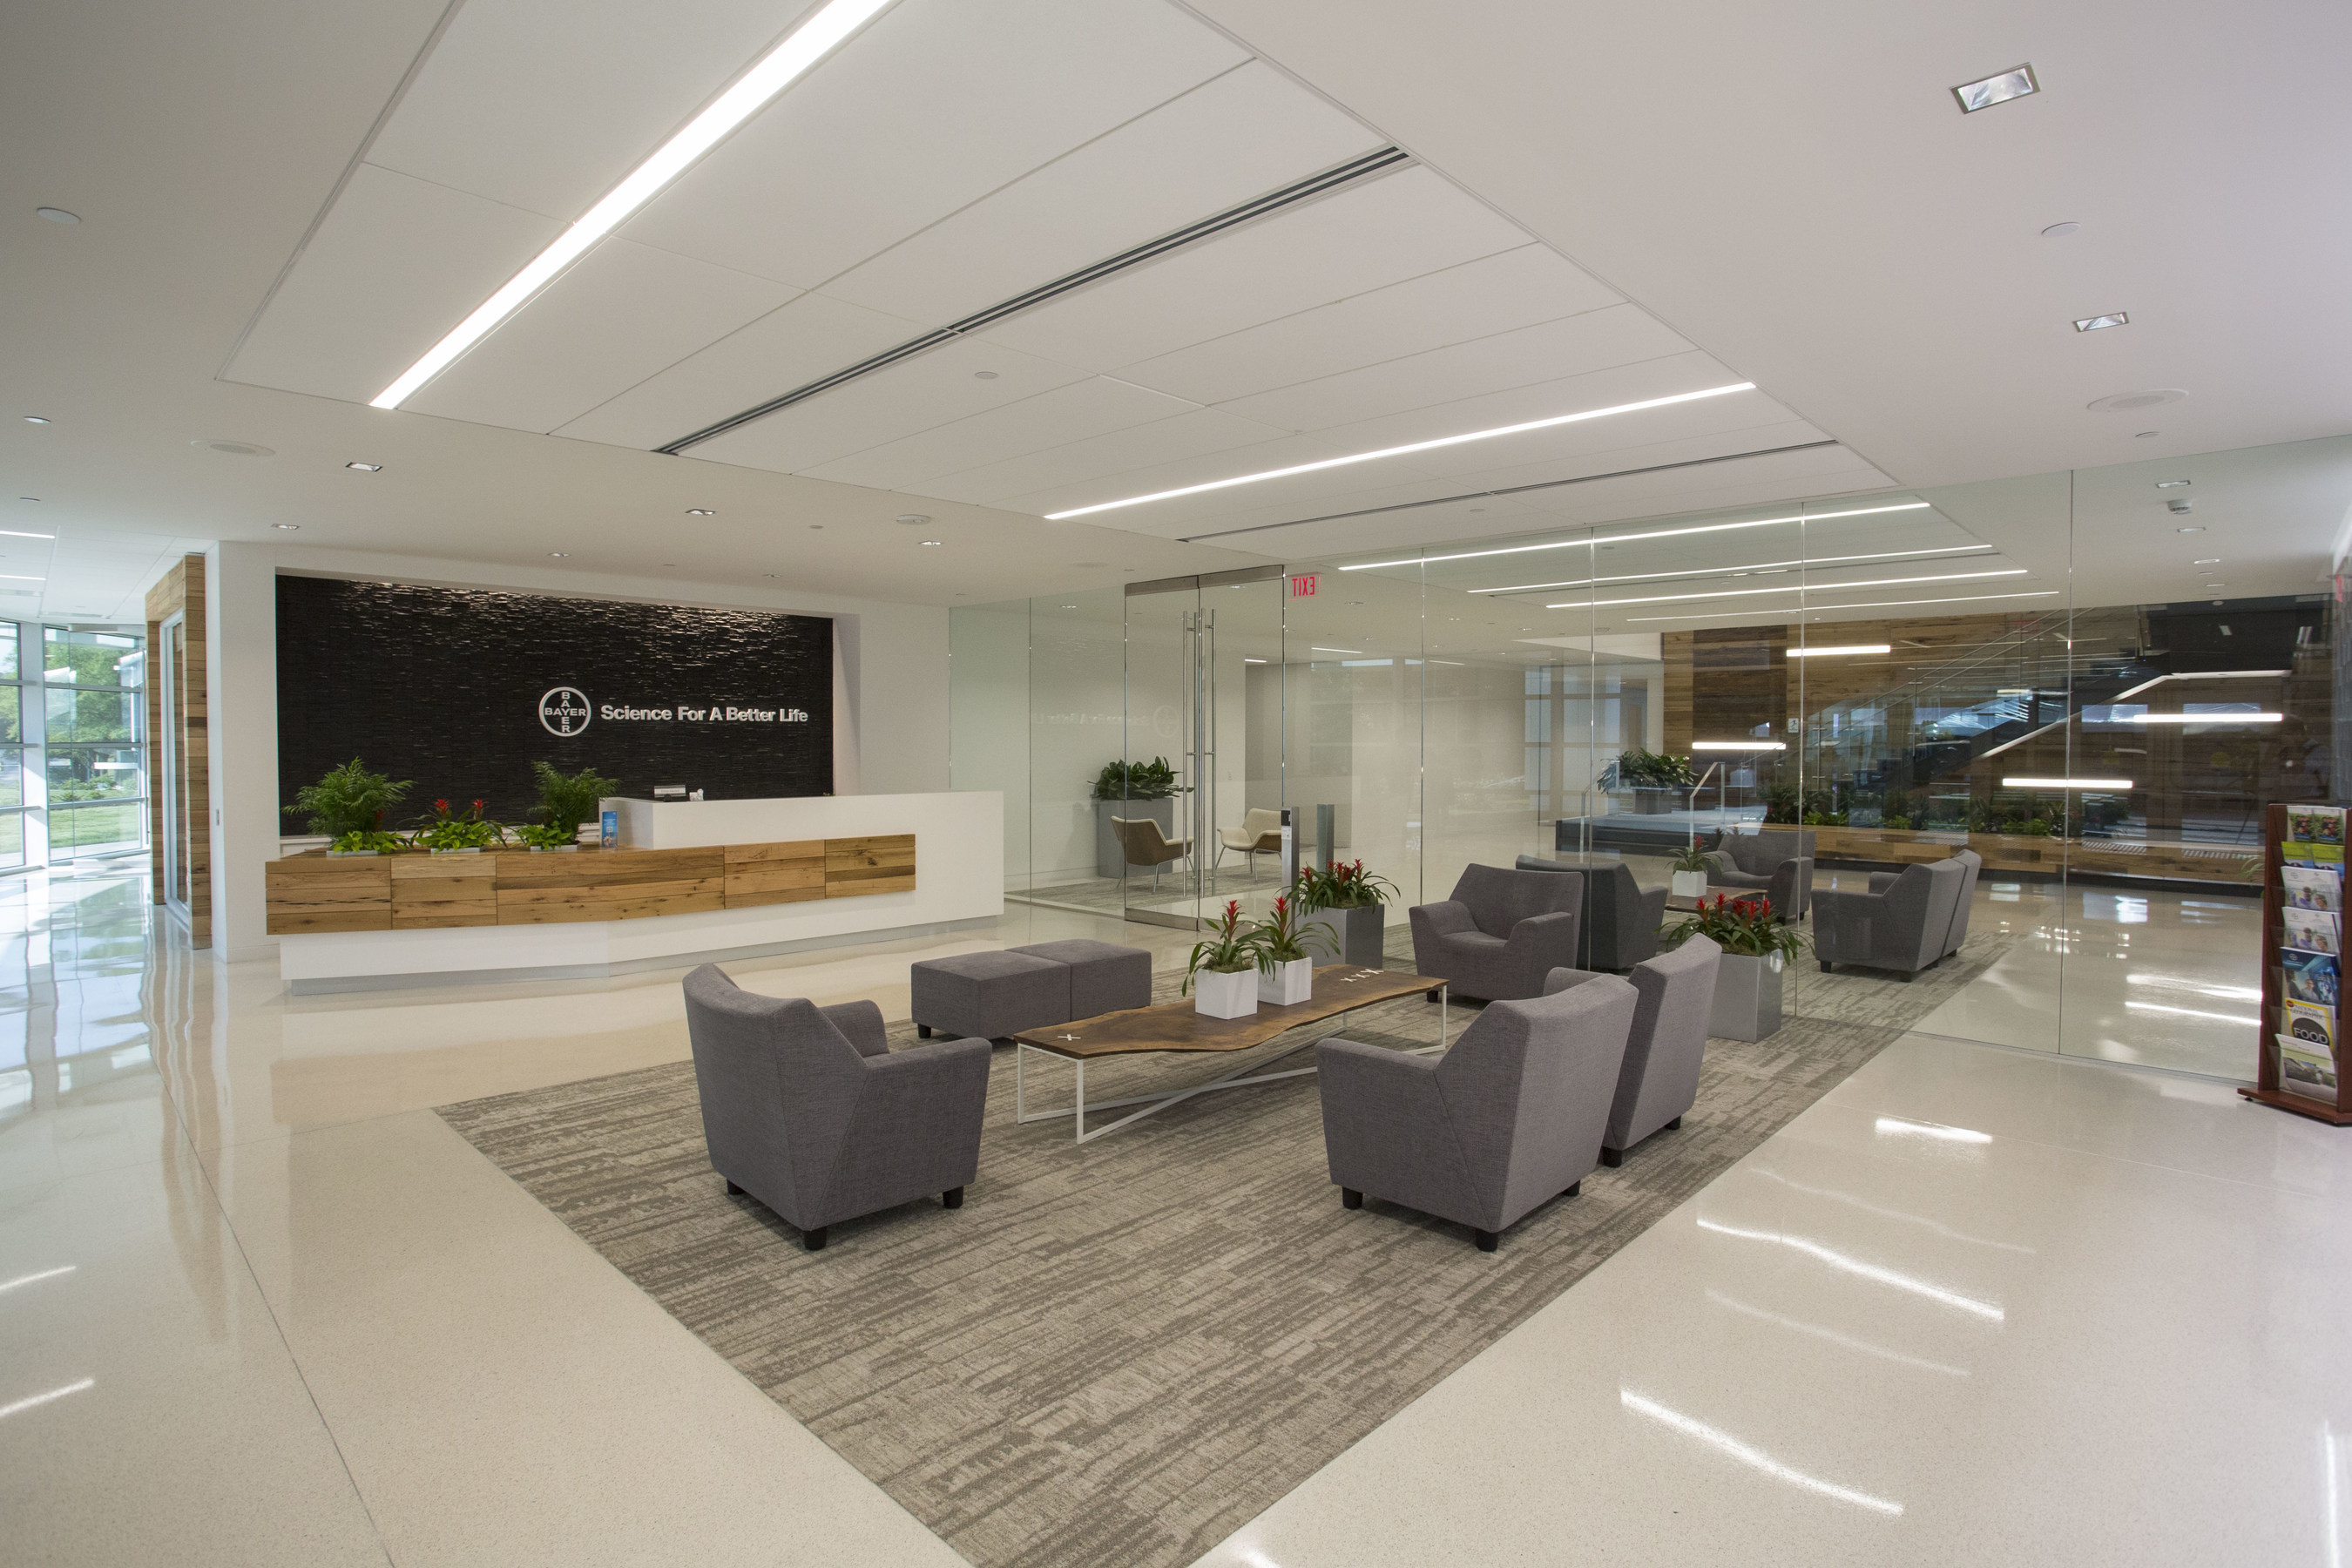 The newly renovated Bayer CropScience headquarters boasts a modern and open design where employees have the resources and space to work efficiently, as well as amenities further enhancing Bayer's reputation as one of the Triangle's best places to work.